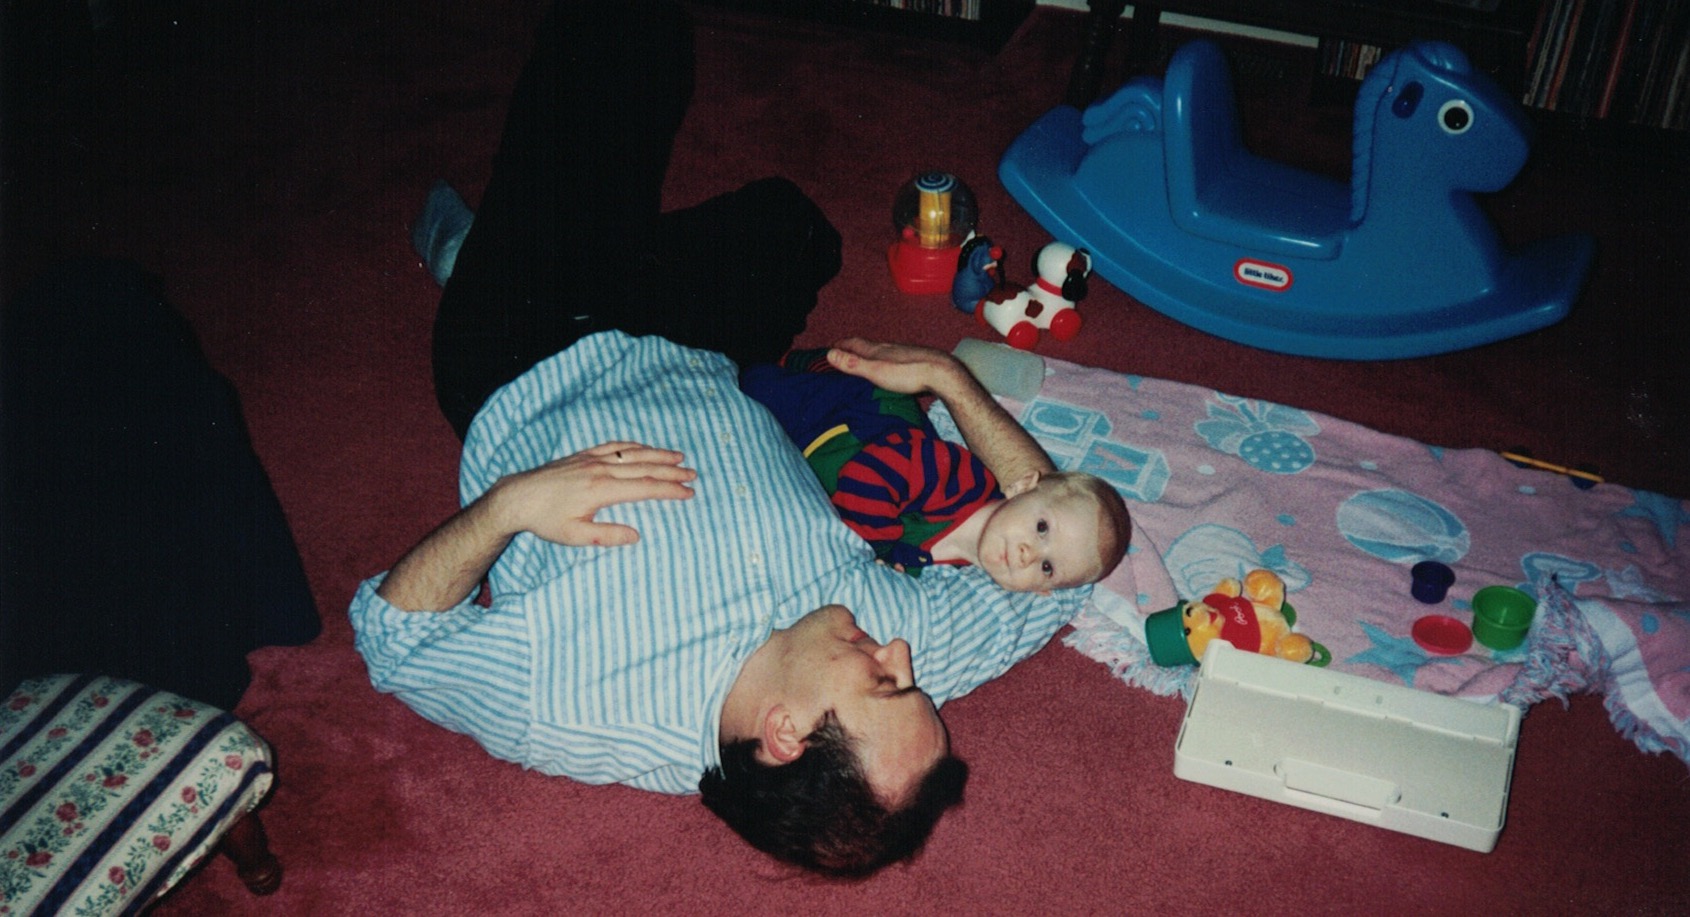 Family photo of my dad laying on the floor with me when I was a baby